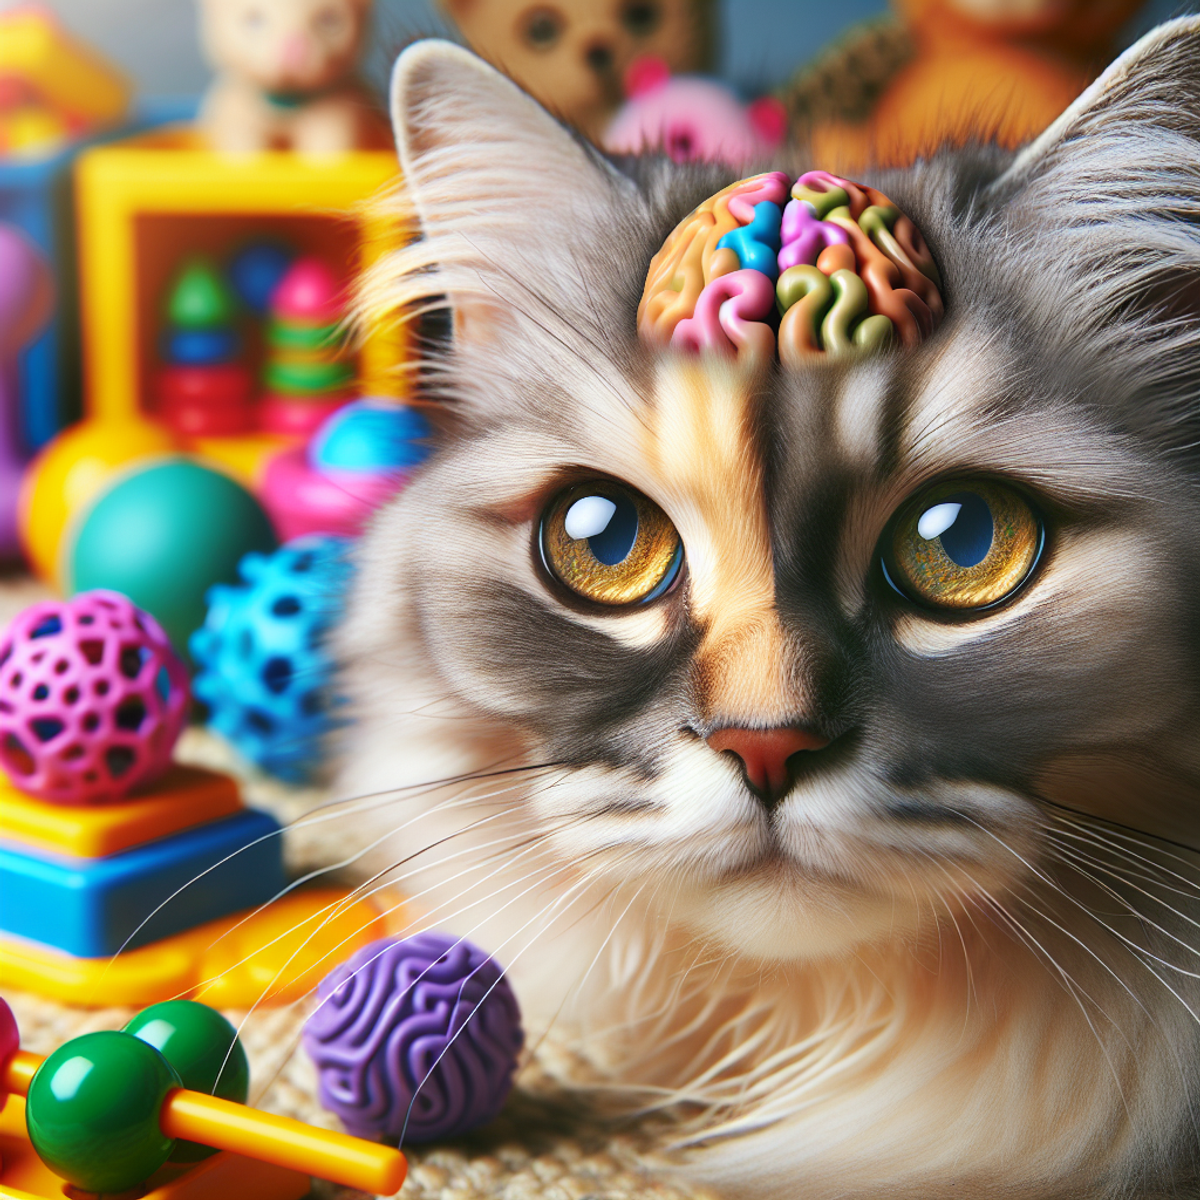 A senior cat surrounded by colorful toys and puzzle games, its wise expression and bright eyes gleaming with intelligence.